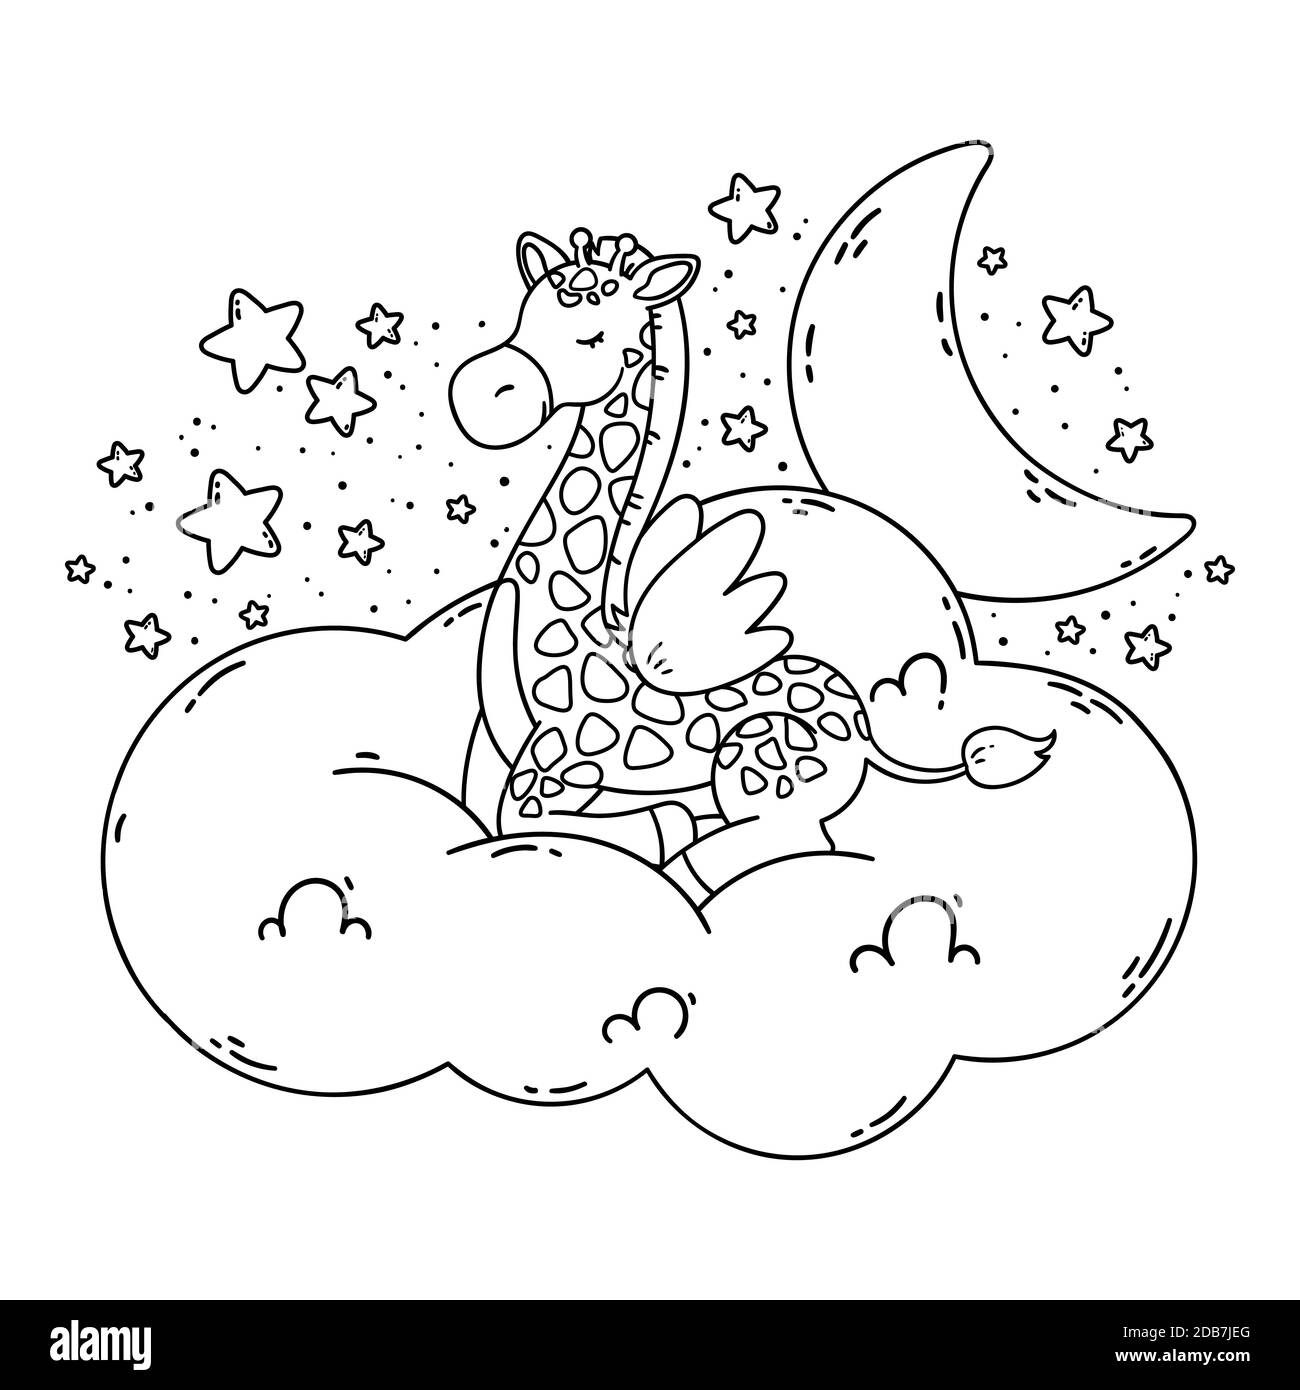 Cute poster with giraffe, moon, stars. Vector illustration for coloring book isolated on white background. Good night nursery picture. Stock Vector